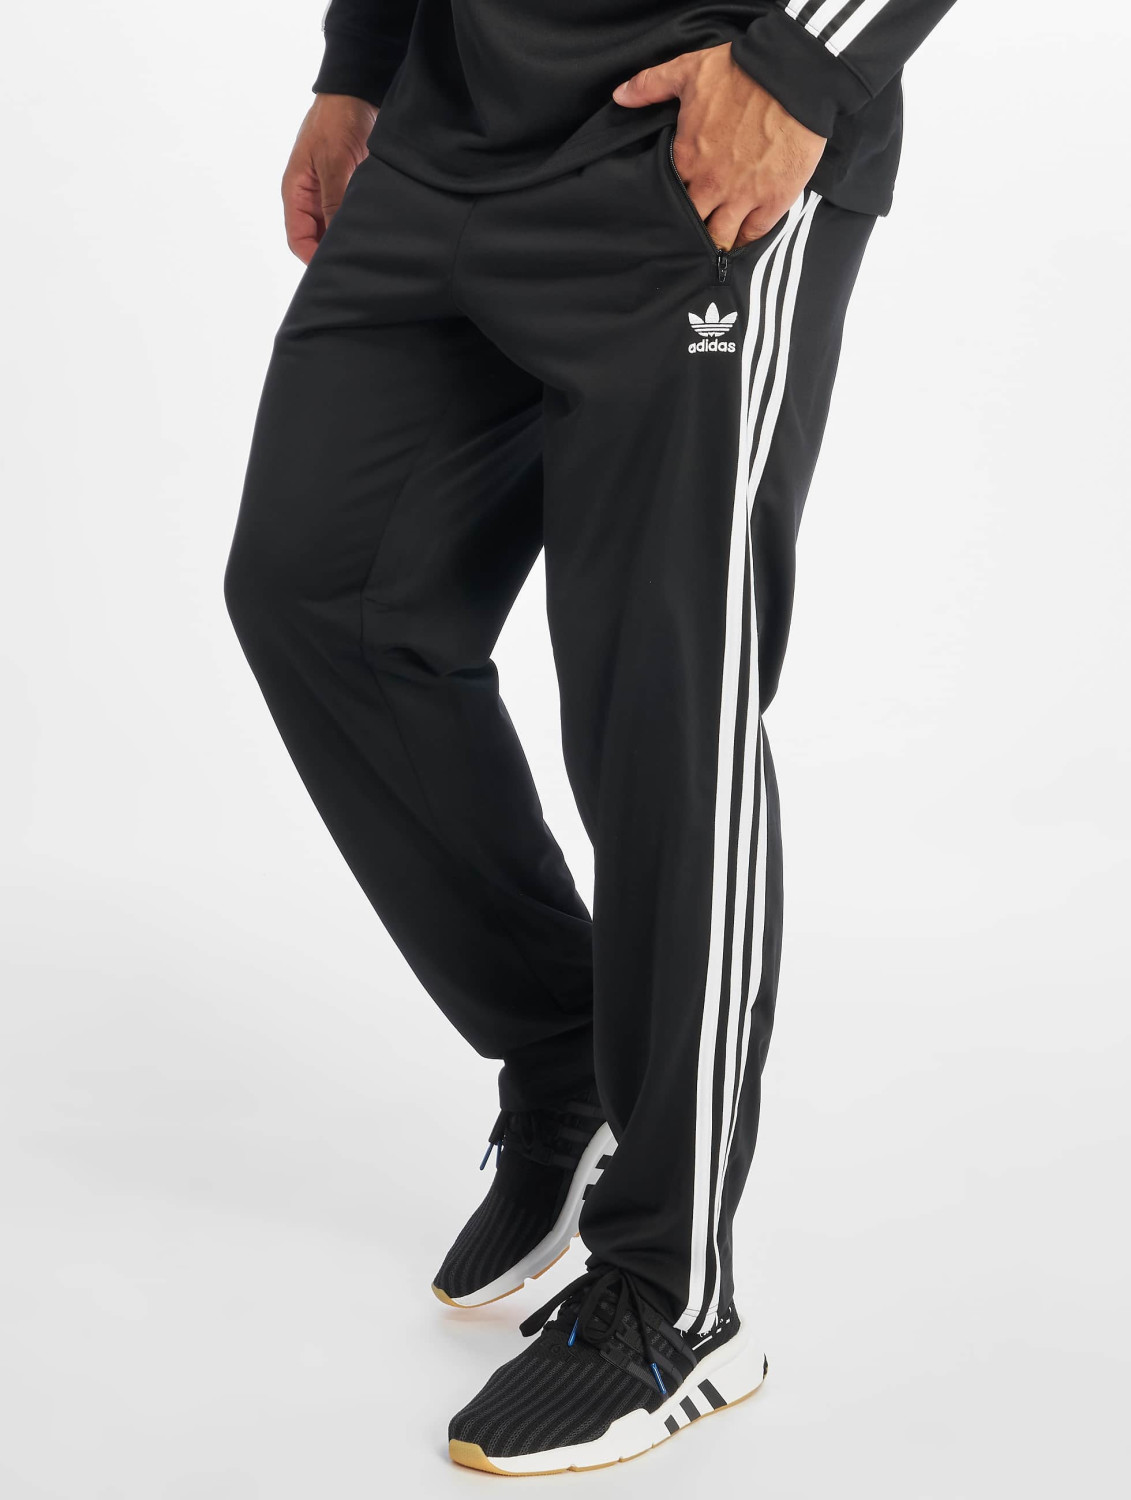 Buy Adidas Firebird Tracksuit Bottoms black from £34.99 (Today) – Best ...